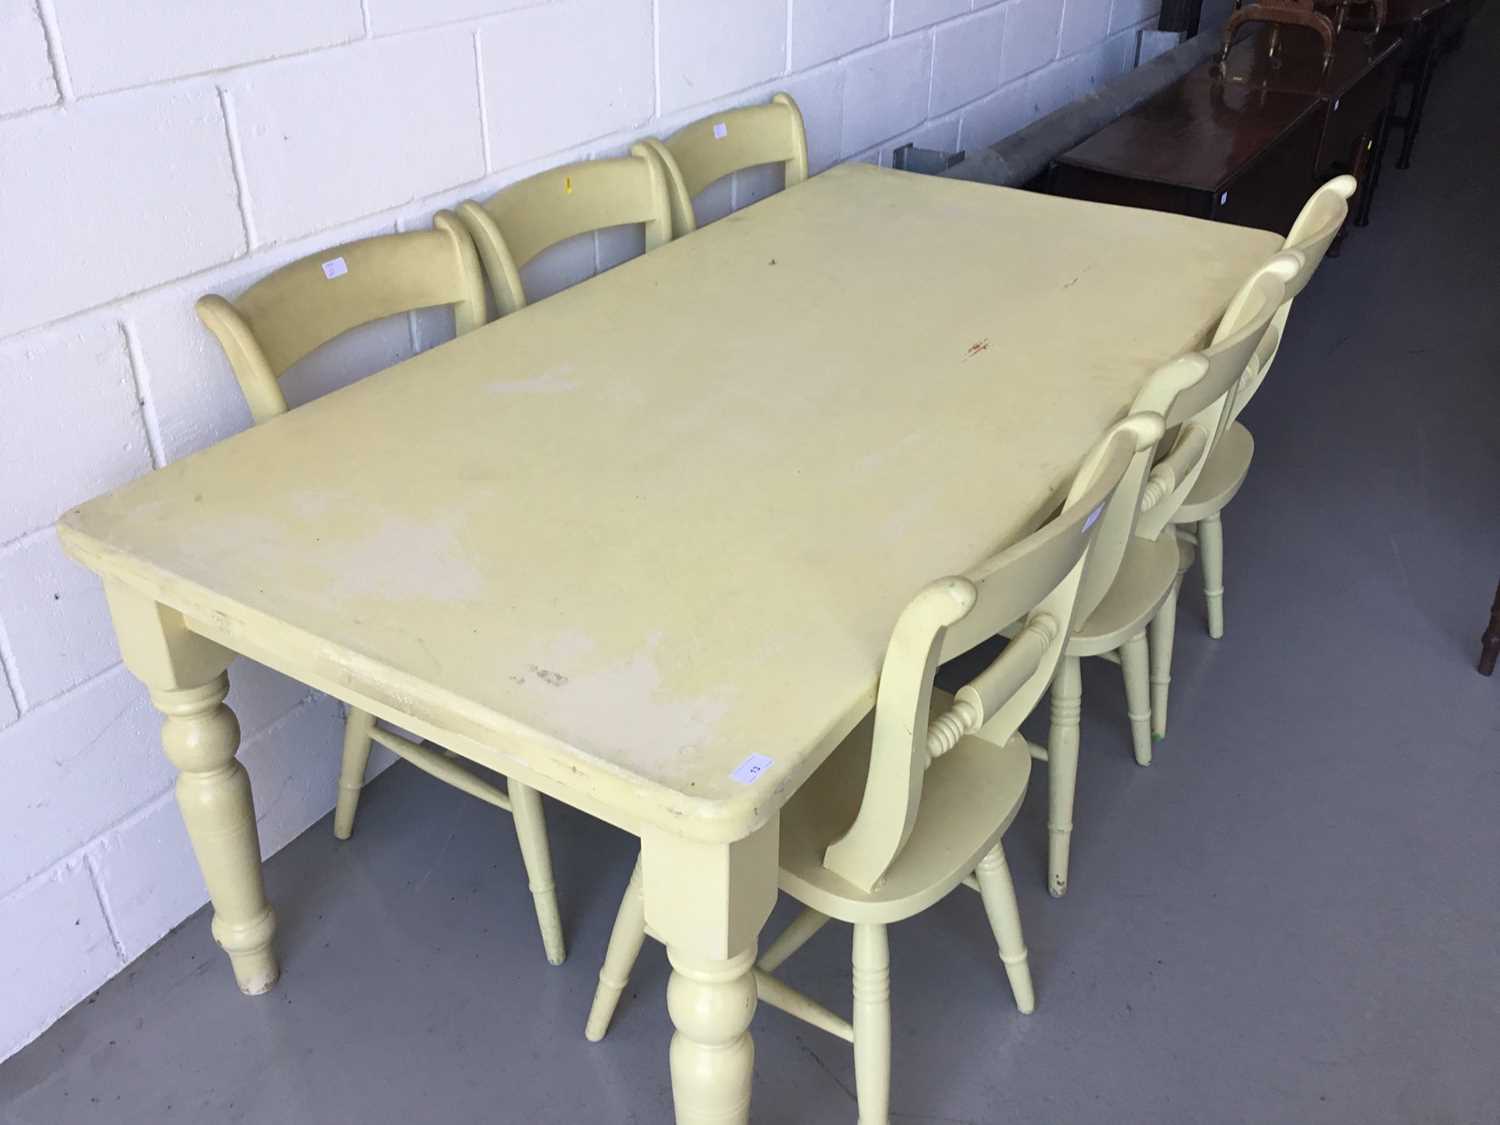 Large painted pine kitchen table on turned legs, together with six similarly painted chairs (7 piece